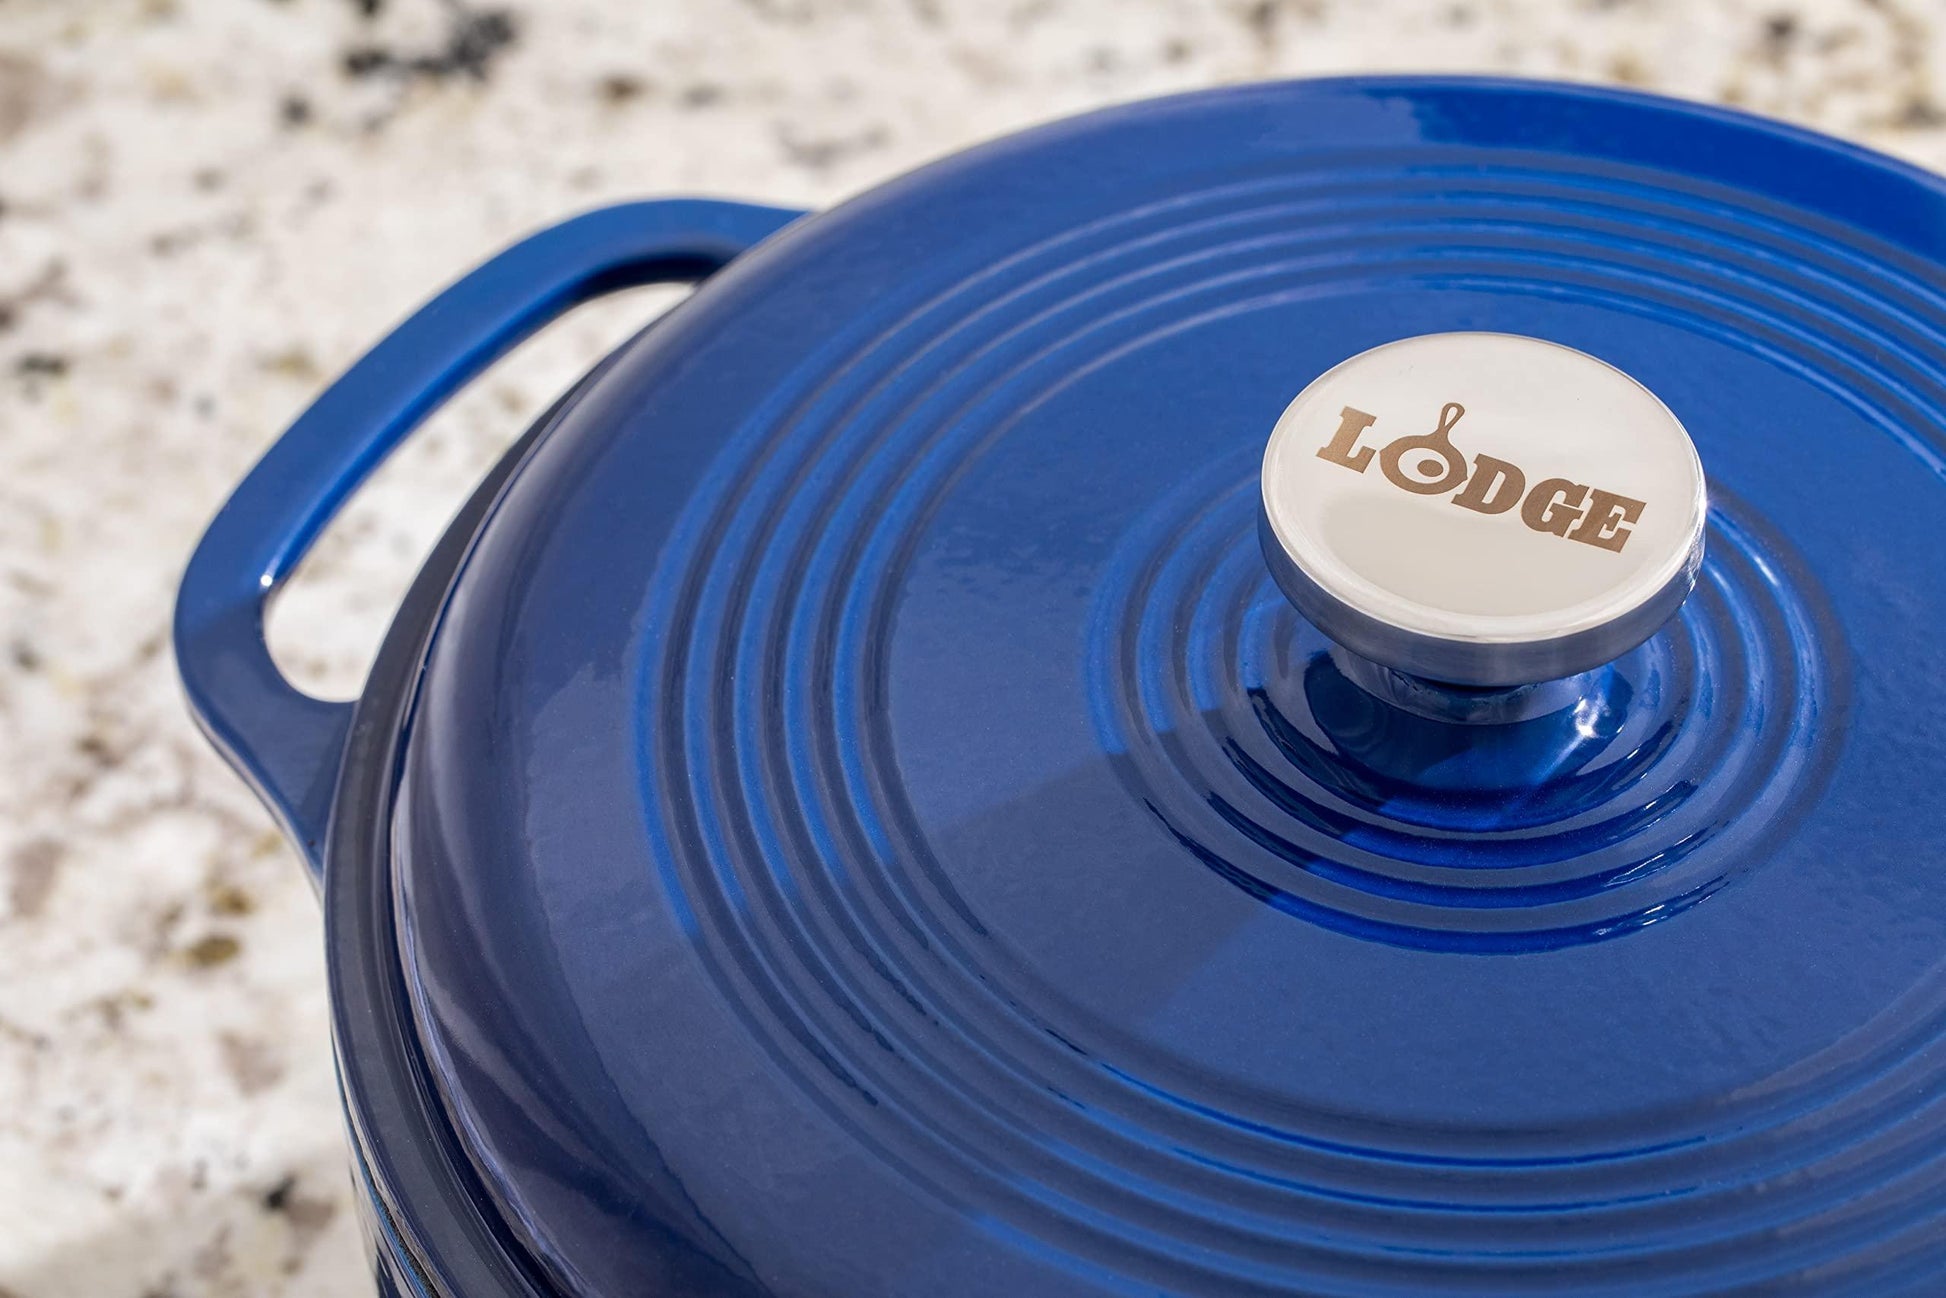 Lodge 6 Quart Enameled Cast Iron Dutch Oven with Lid – Dual Handles – Oven Safe up to 500° F or on Stovetop - Use to Marinate, Cook, Bake, Refrigerate and Serve – Indigo - CookCave